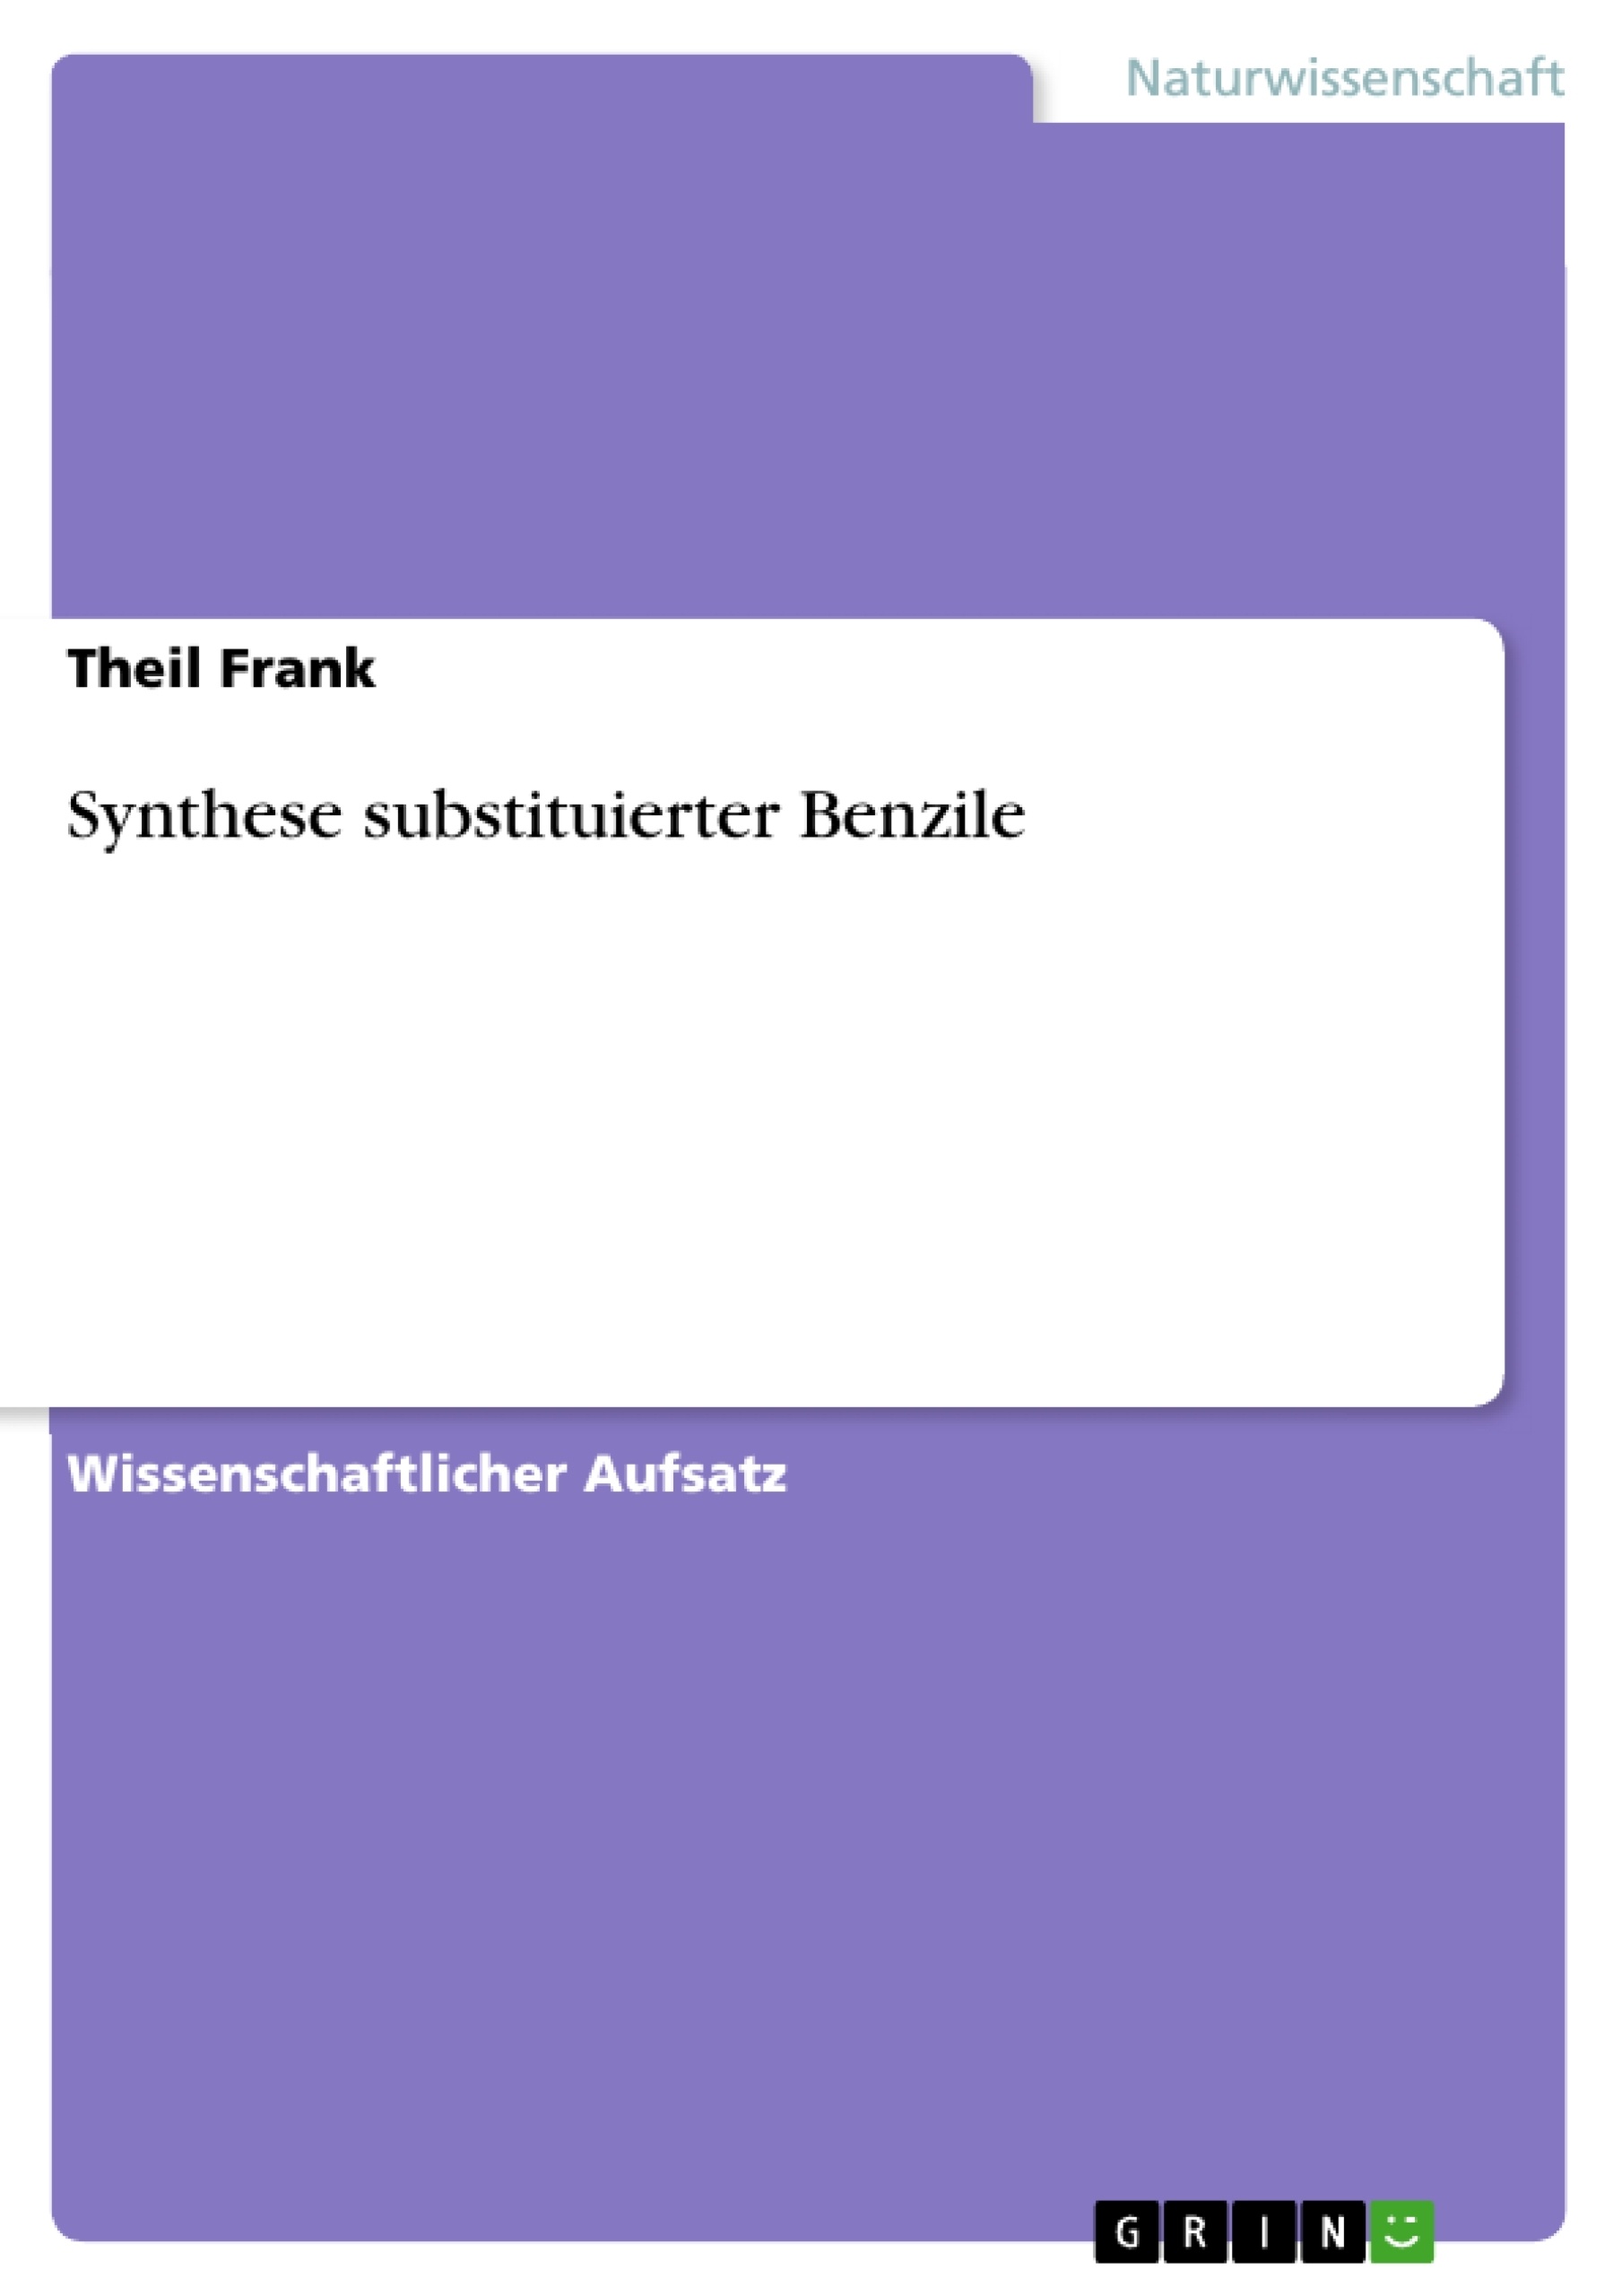 Titre: Synthese substituierter Benzile